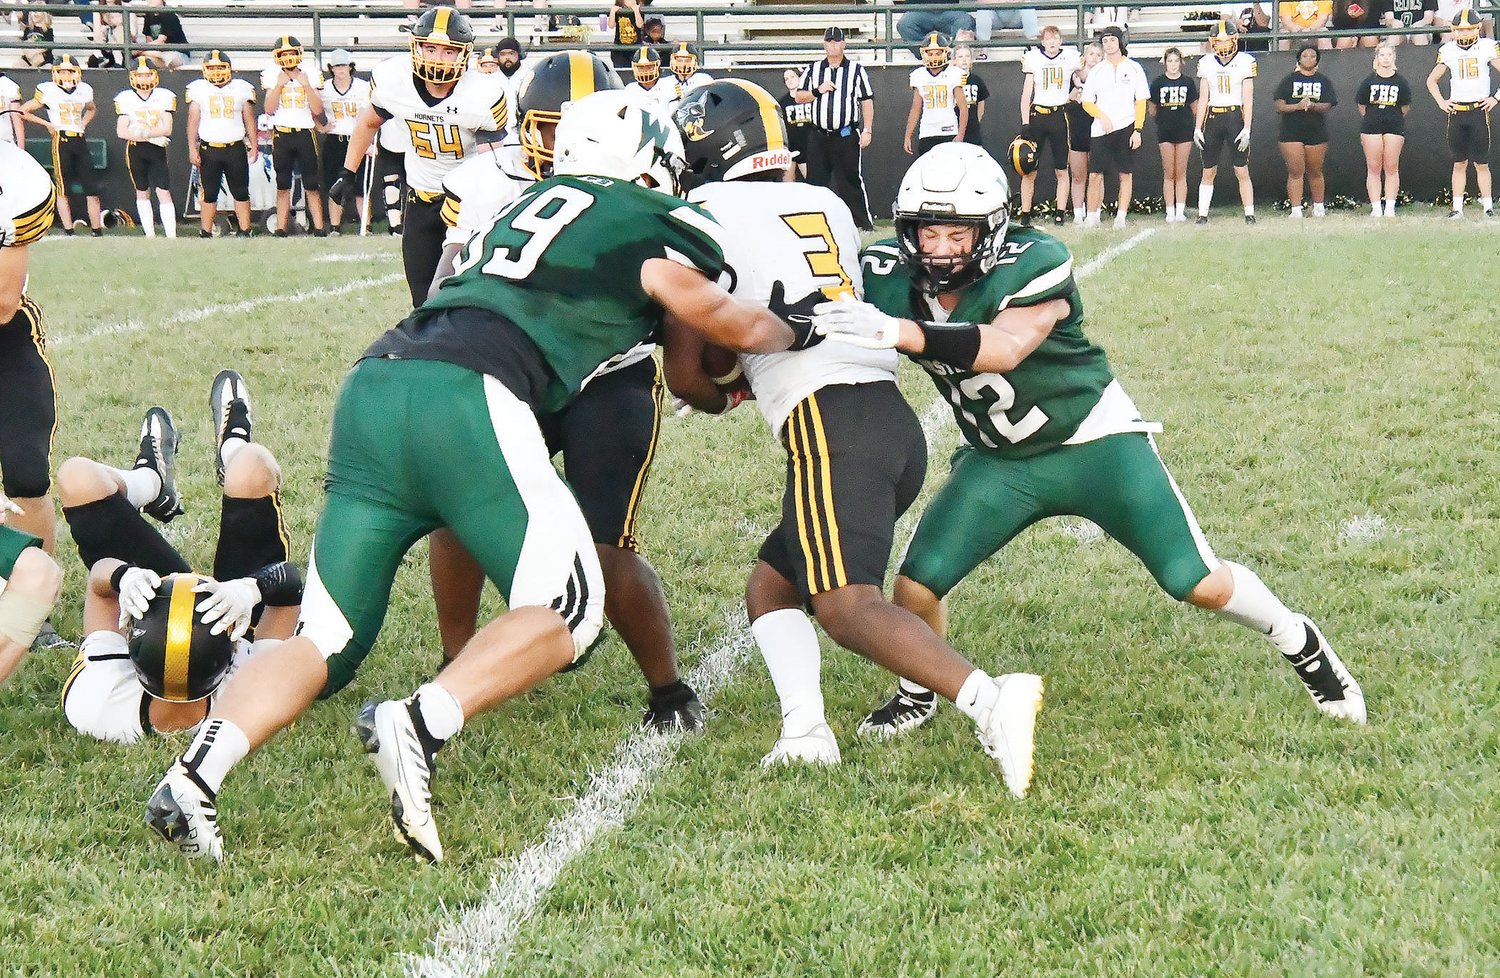 Westran's Langden Kitchen (89) and Brady Hollman (12) team up for a tackle during the first half of Friday's game.